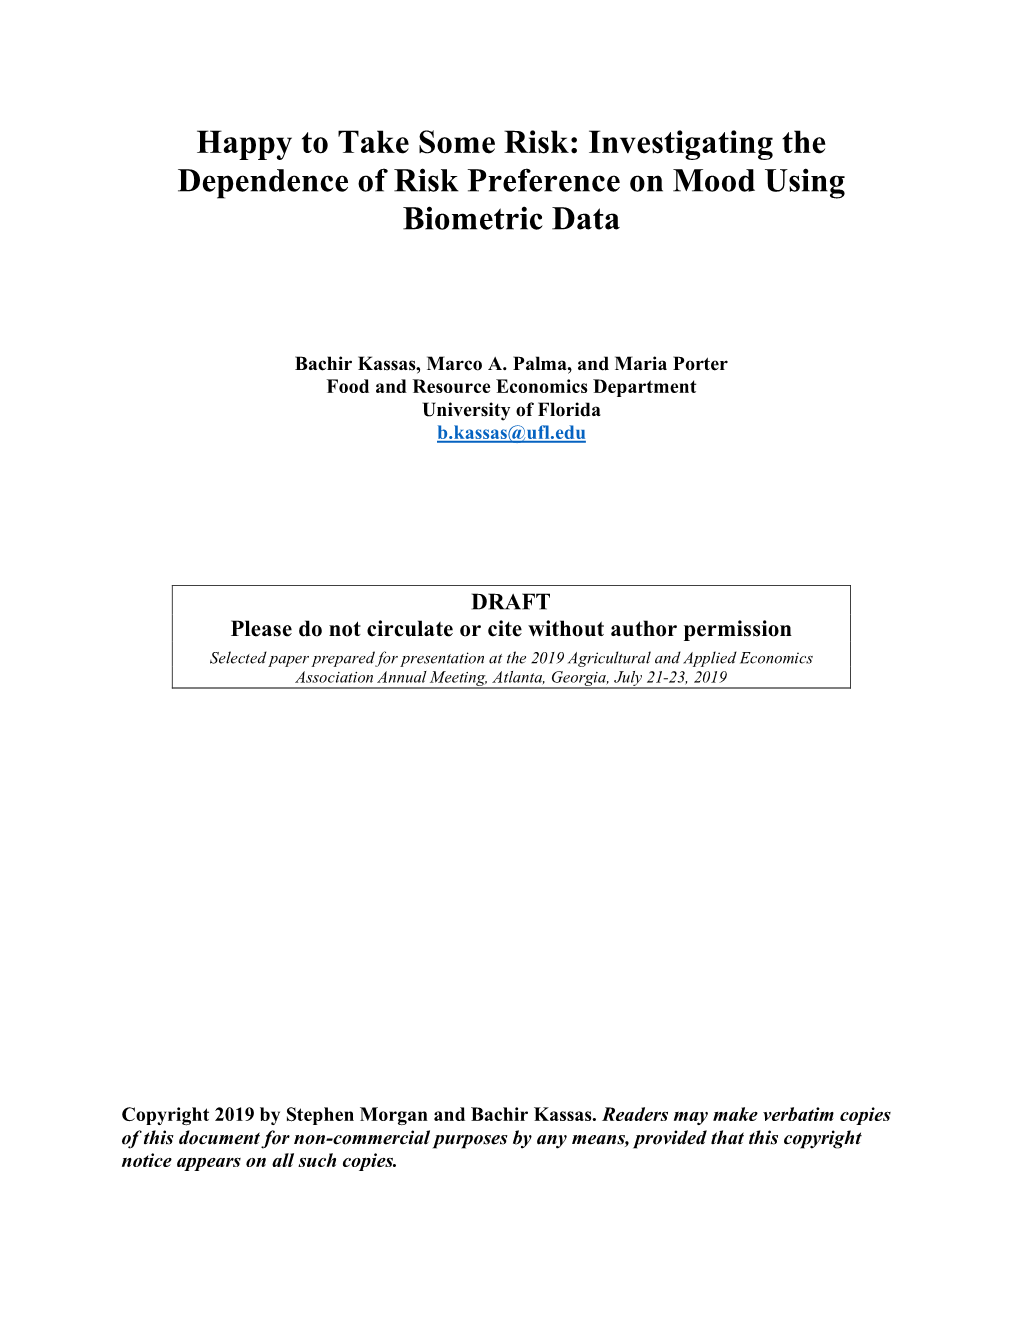 Happy to Take Some Risk: Investigating the Dependence of Risk Preference on Mood Using Biometric Data